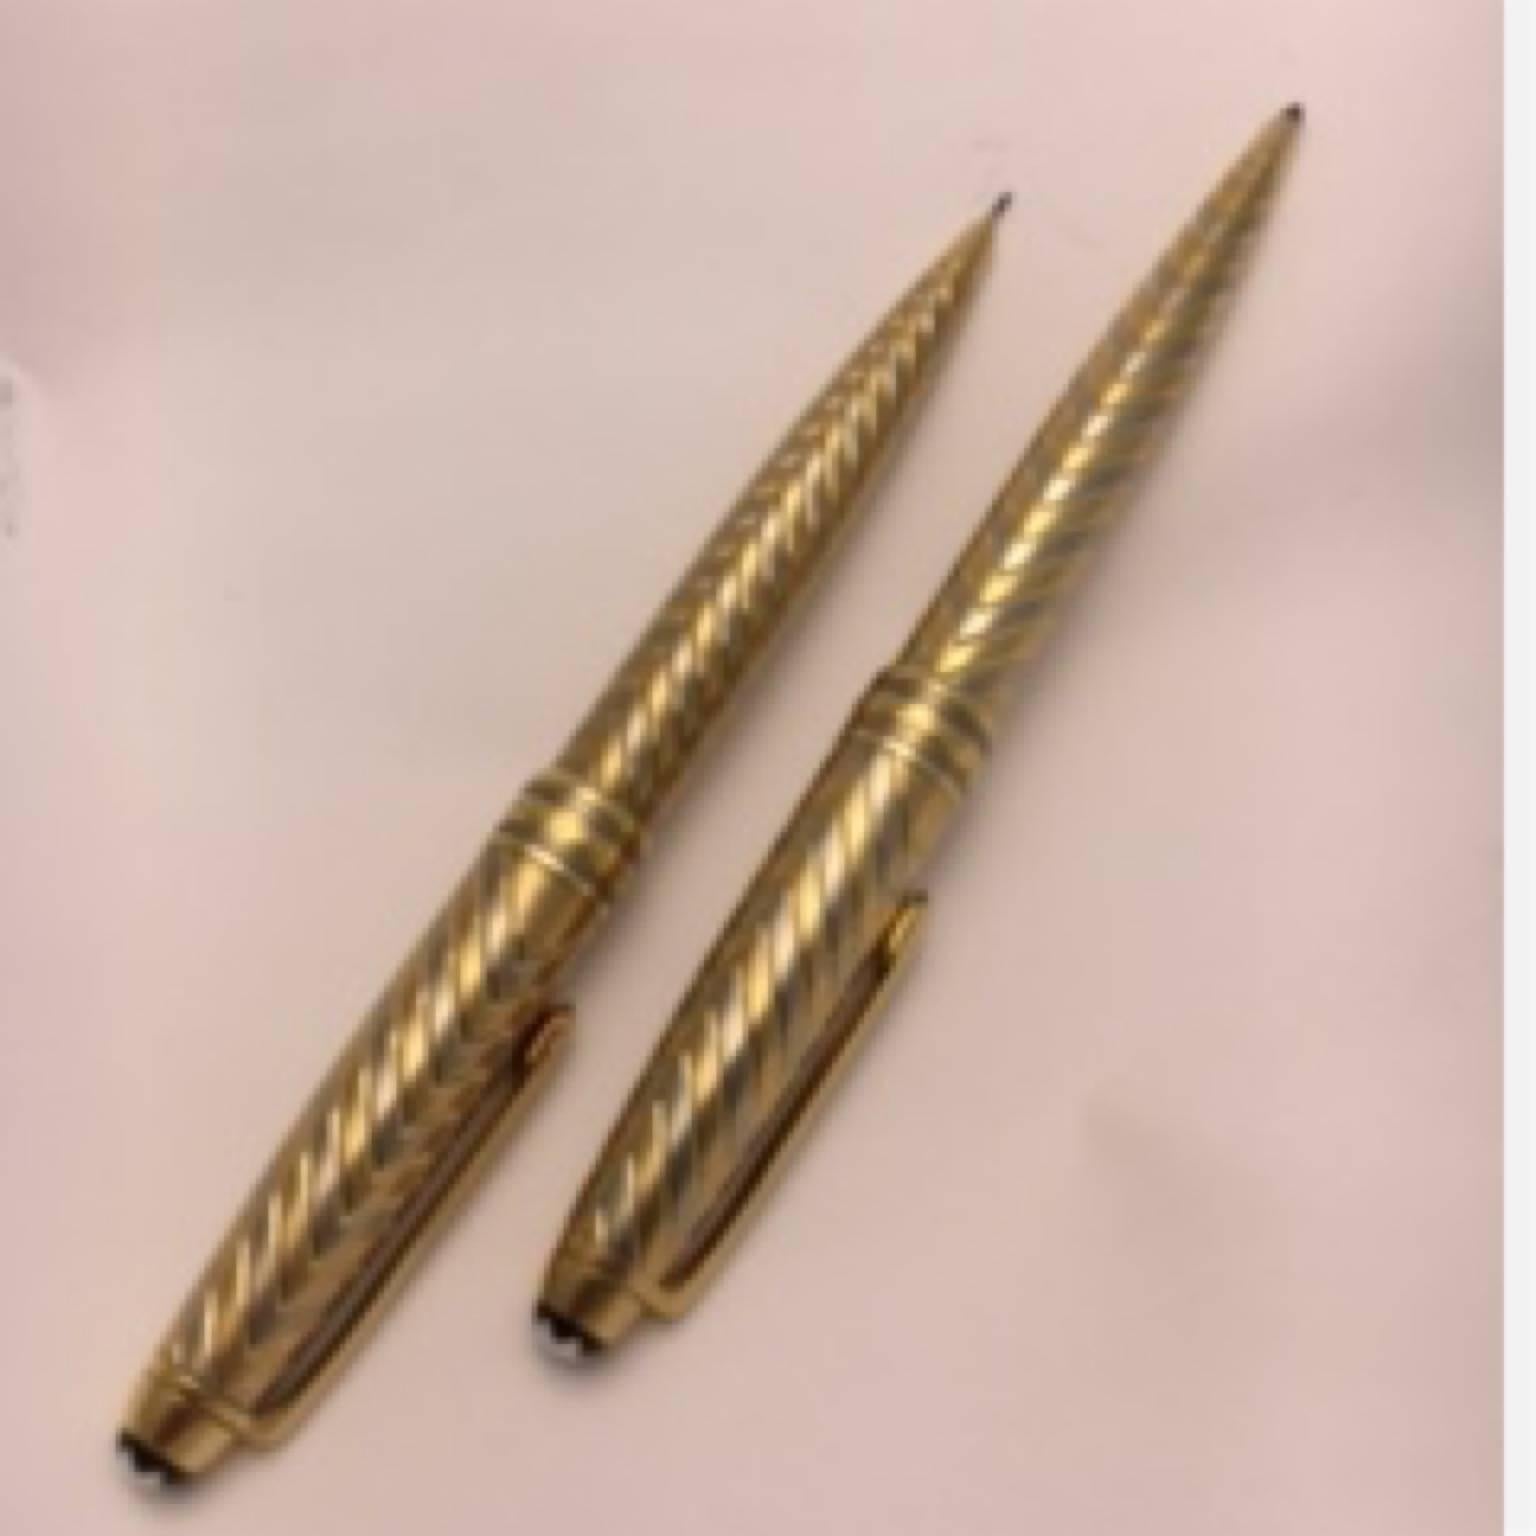 This Montblanc Meisterstuck two-tone Pen and Pencil set is in 18 Karat gold.
The set consist of one ball point pen and one mechanical pencil. This is such a rare find to have been made in the 1980's and still in mint condition. The clips have been